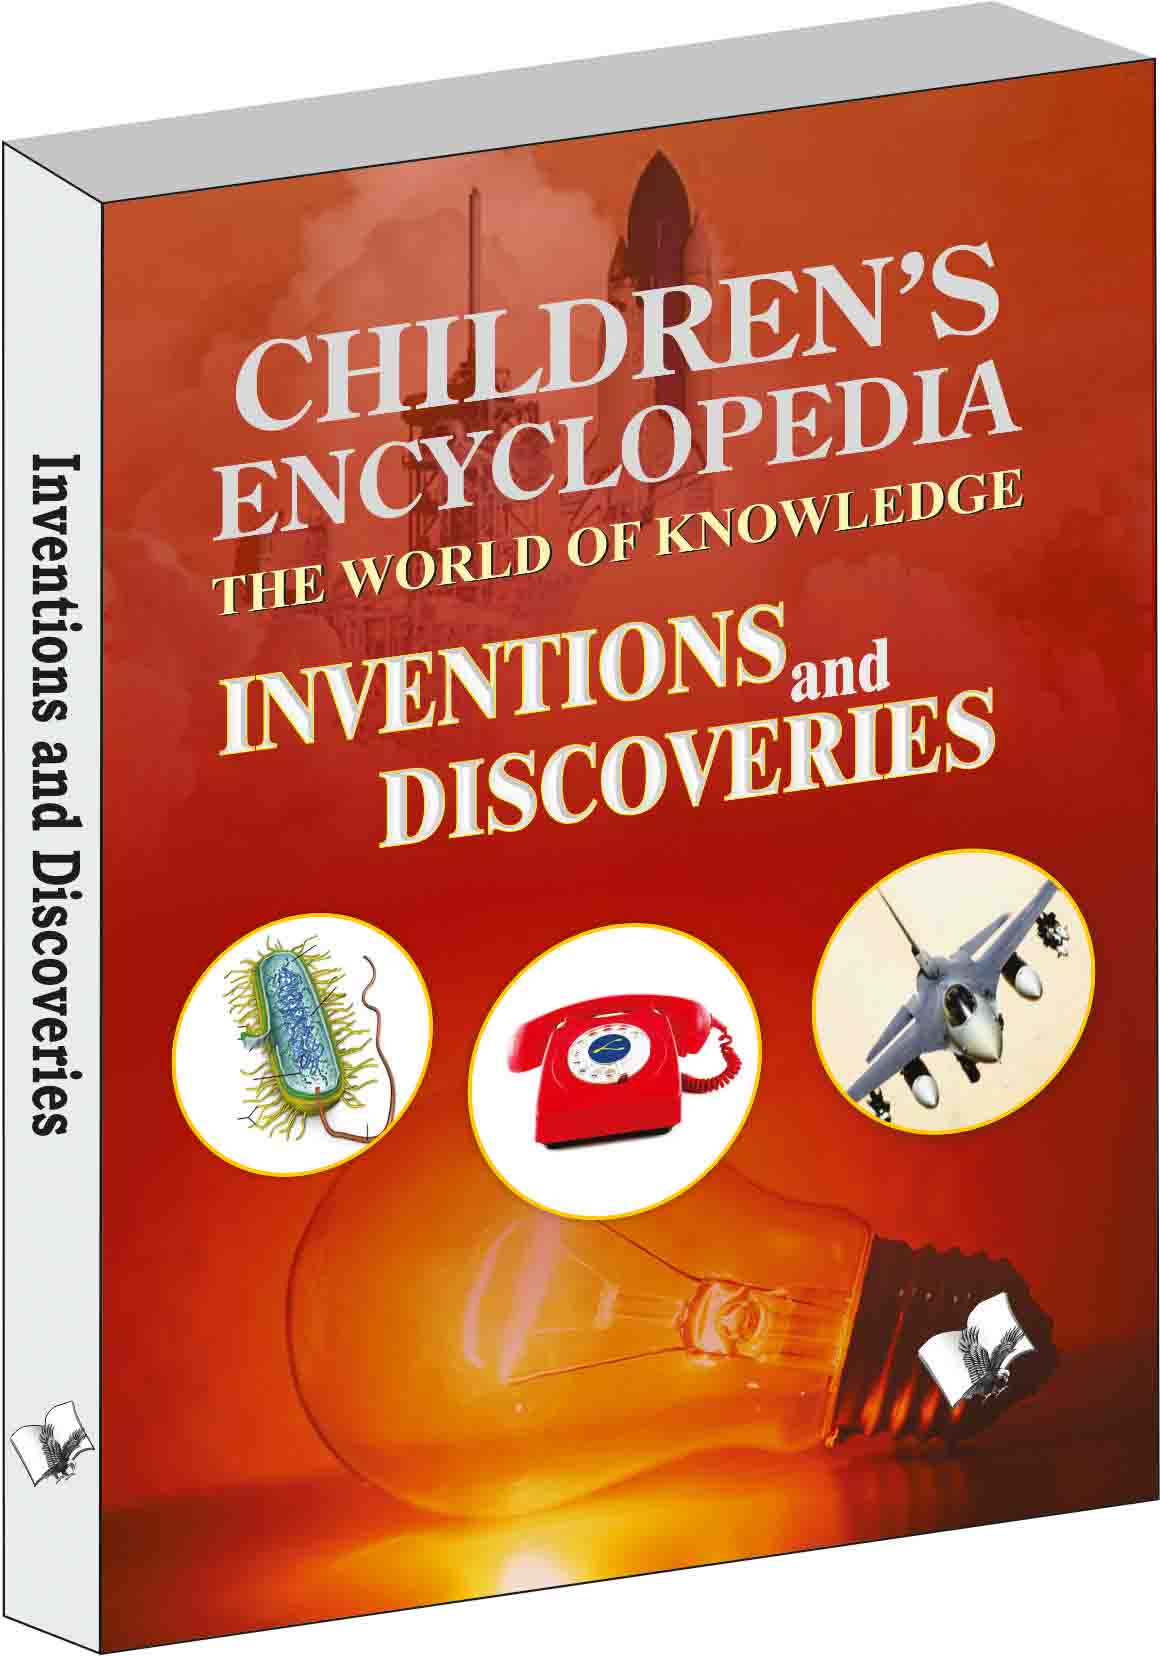 childrens-encyclopedia-inventions-and-discoveries-the-world-of-knowledge-for-the-inquisitive-minds